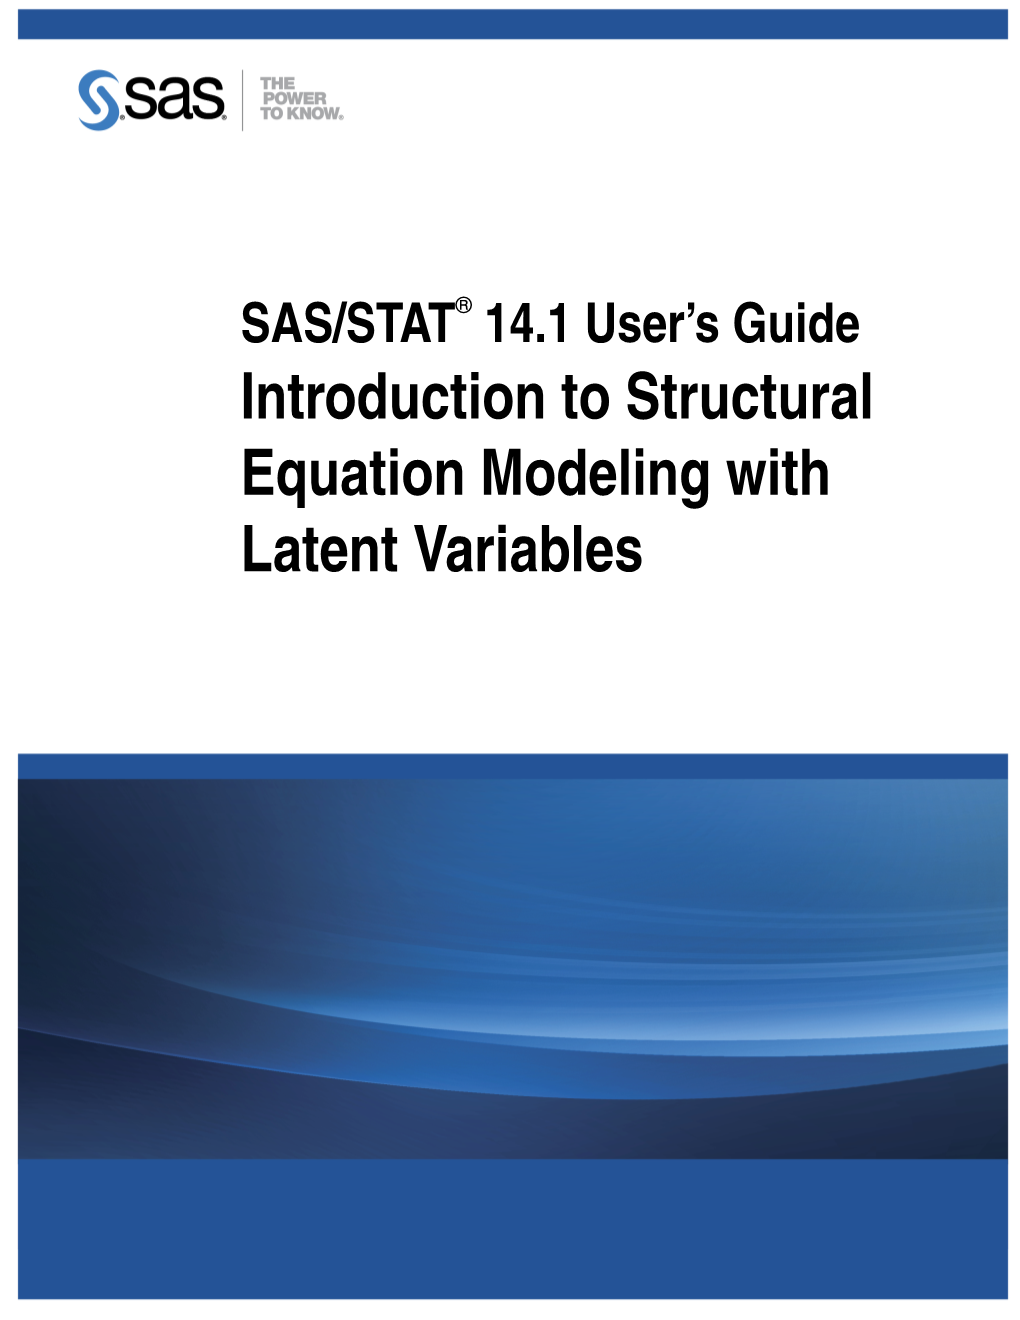 Introduction to Structural Equation Modeling with Latent Variables This Document Is an Individual Chapter from SAS/STAT® 14.1 User’S Guide